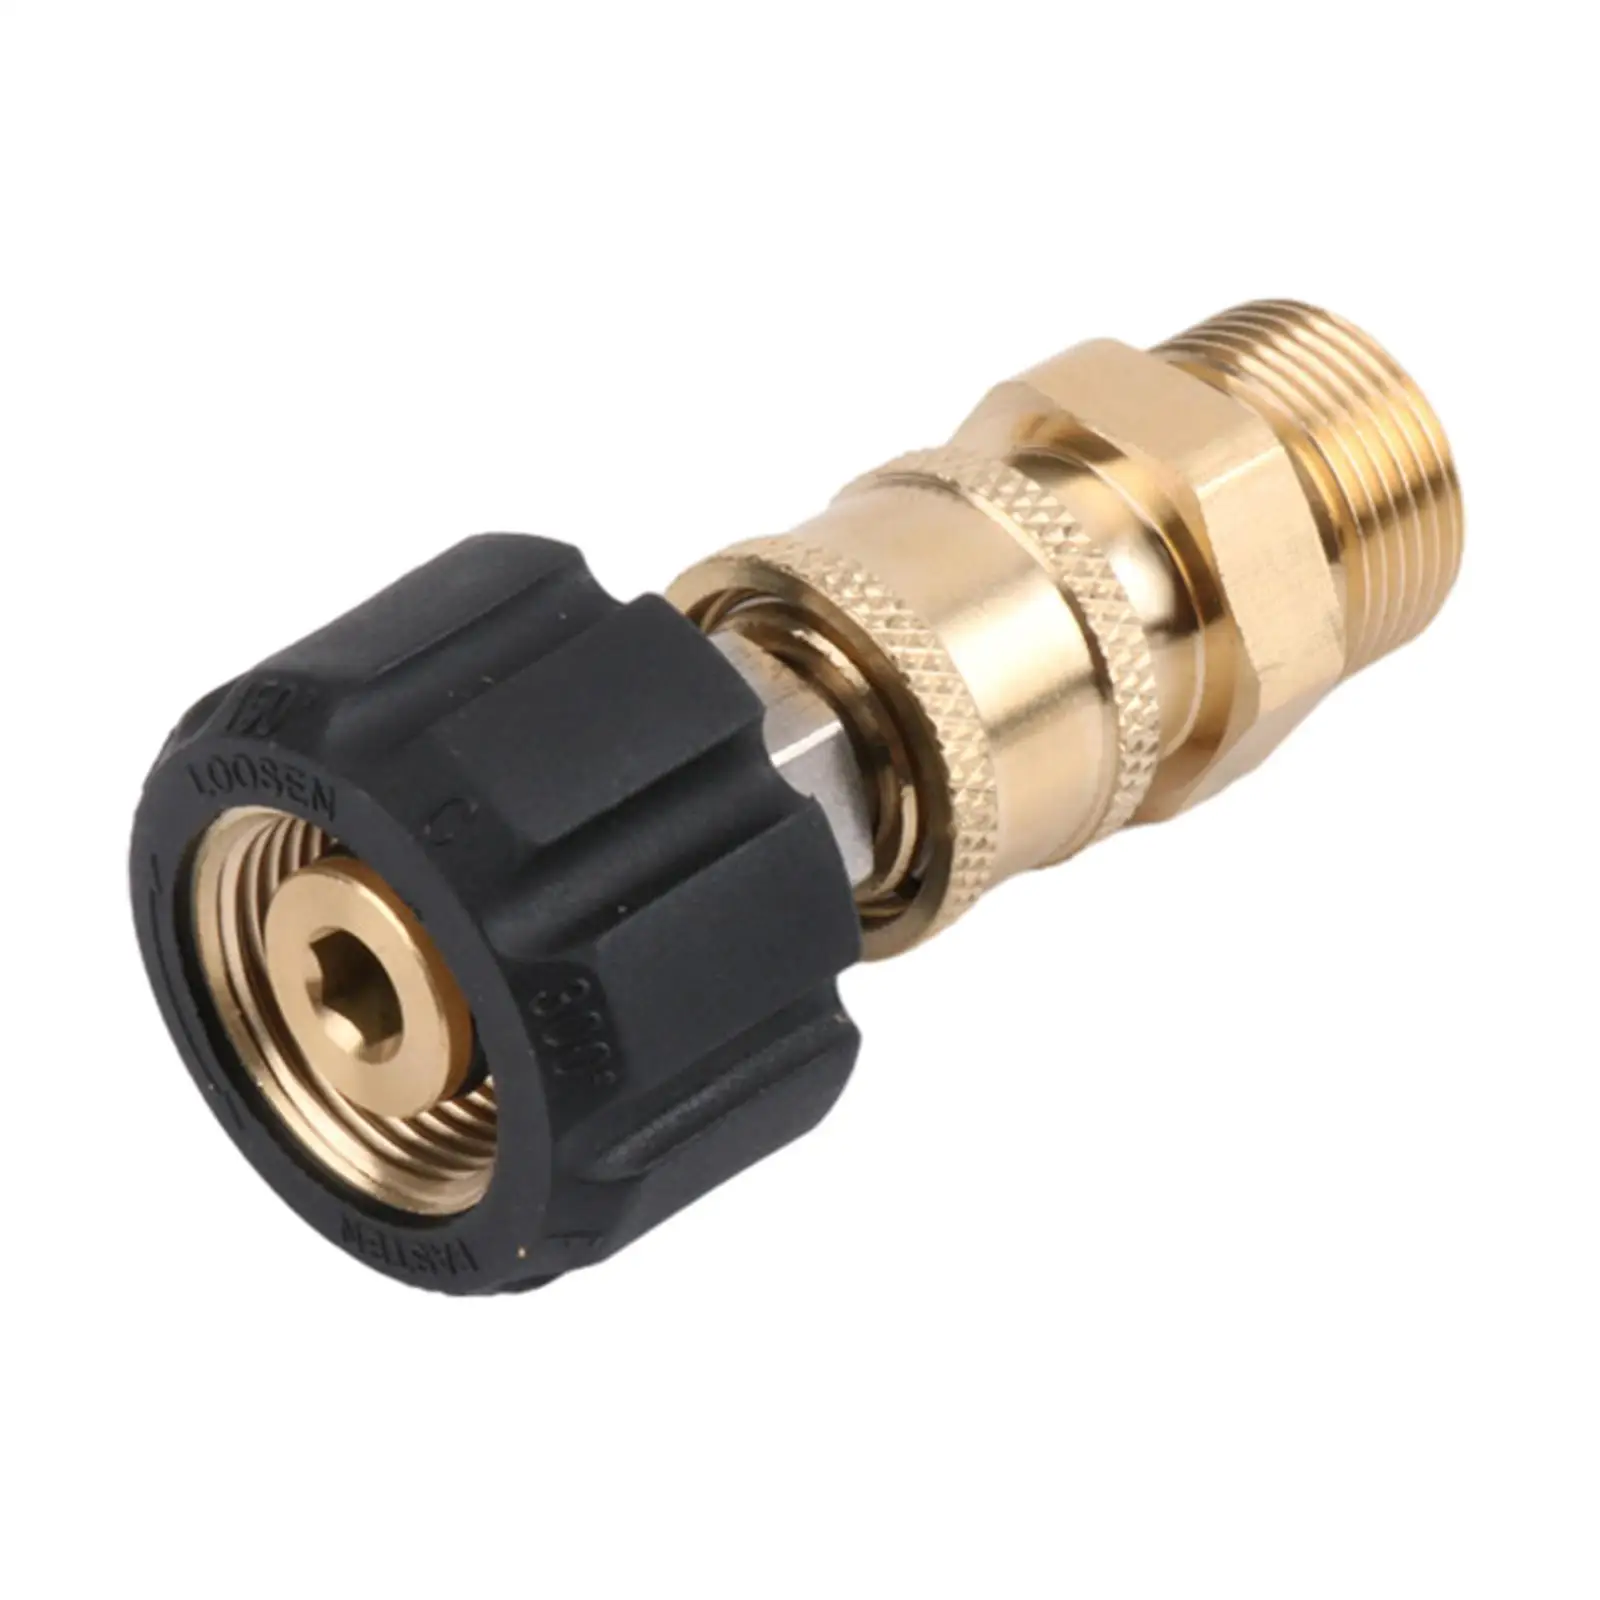 Pressure Washer Adapter Household Durable Rustproof Universal 1/4 inch Quick Connect Adapter for Pressure Washer Accessories